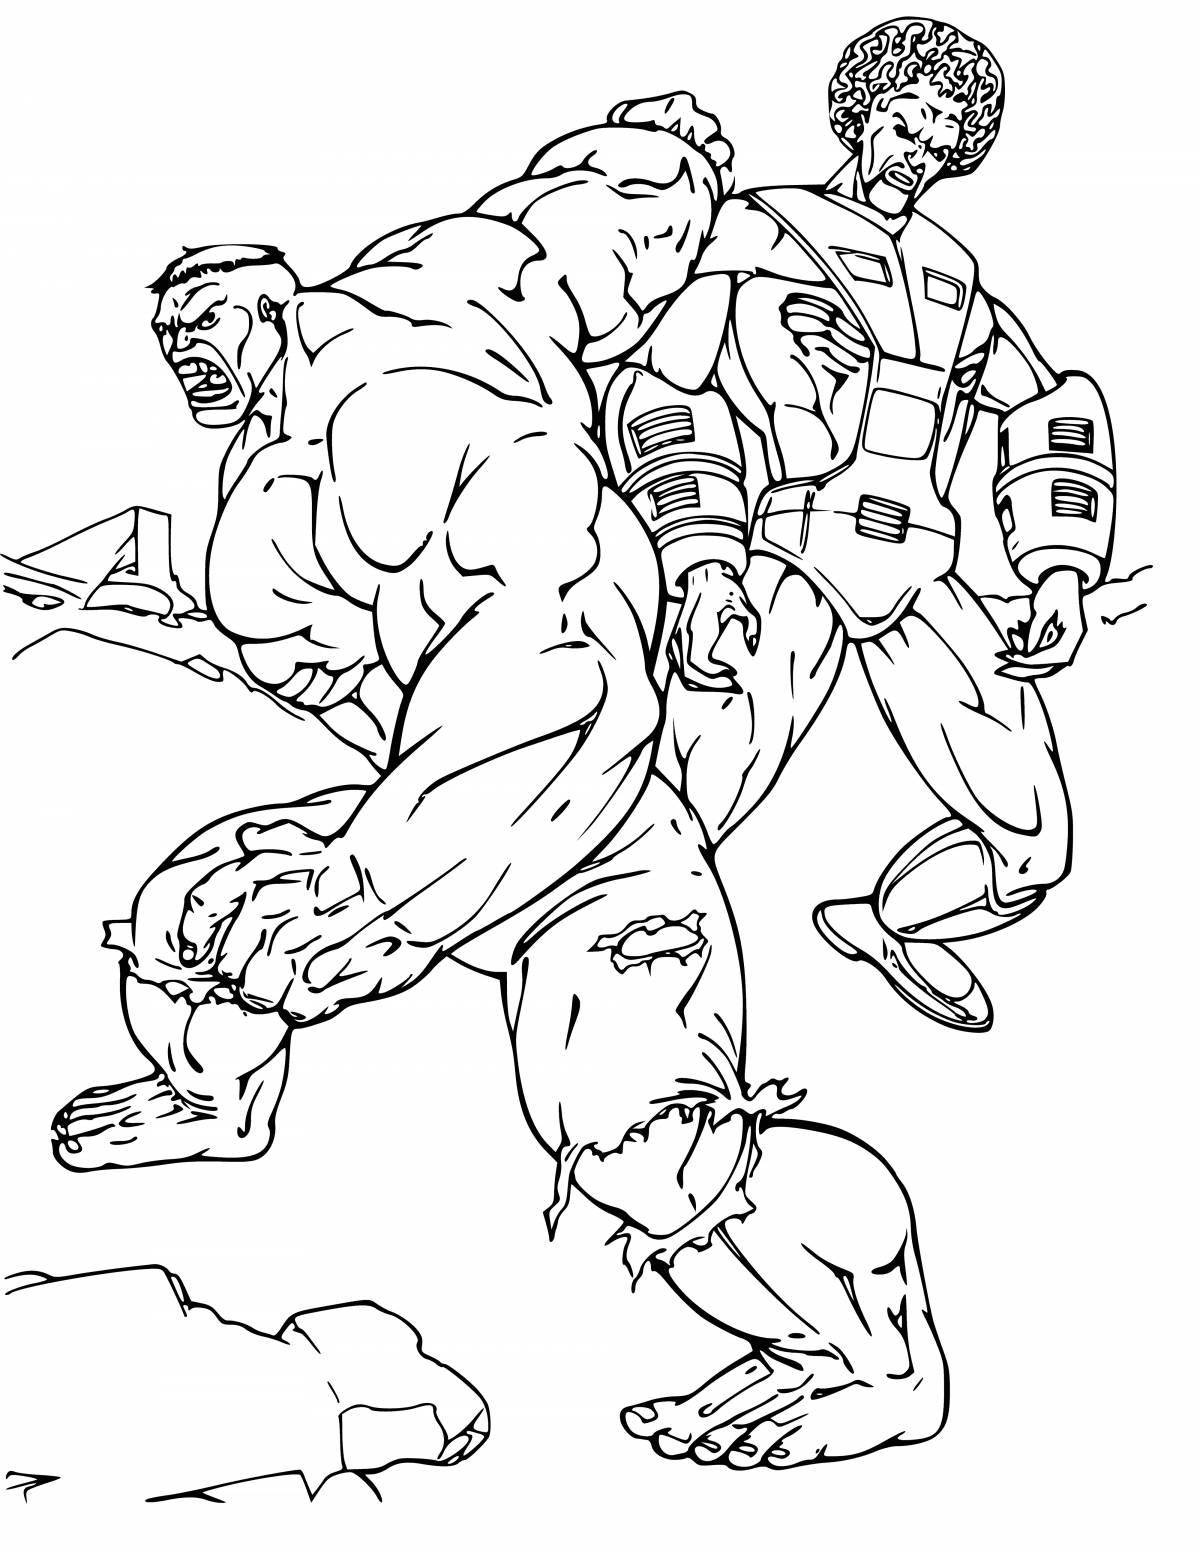 Violent iron man and the hulk coloring book